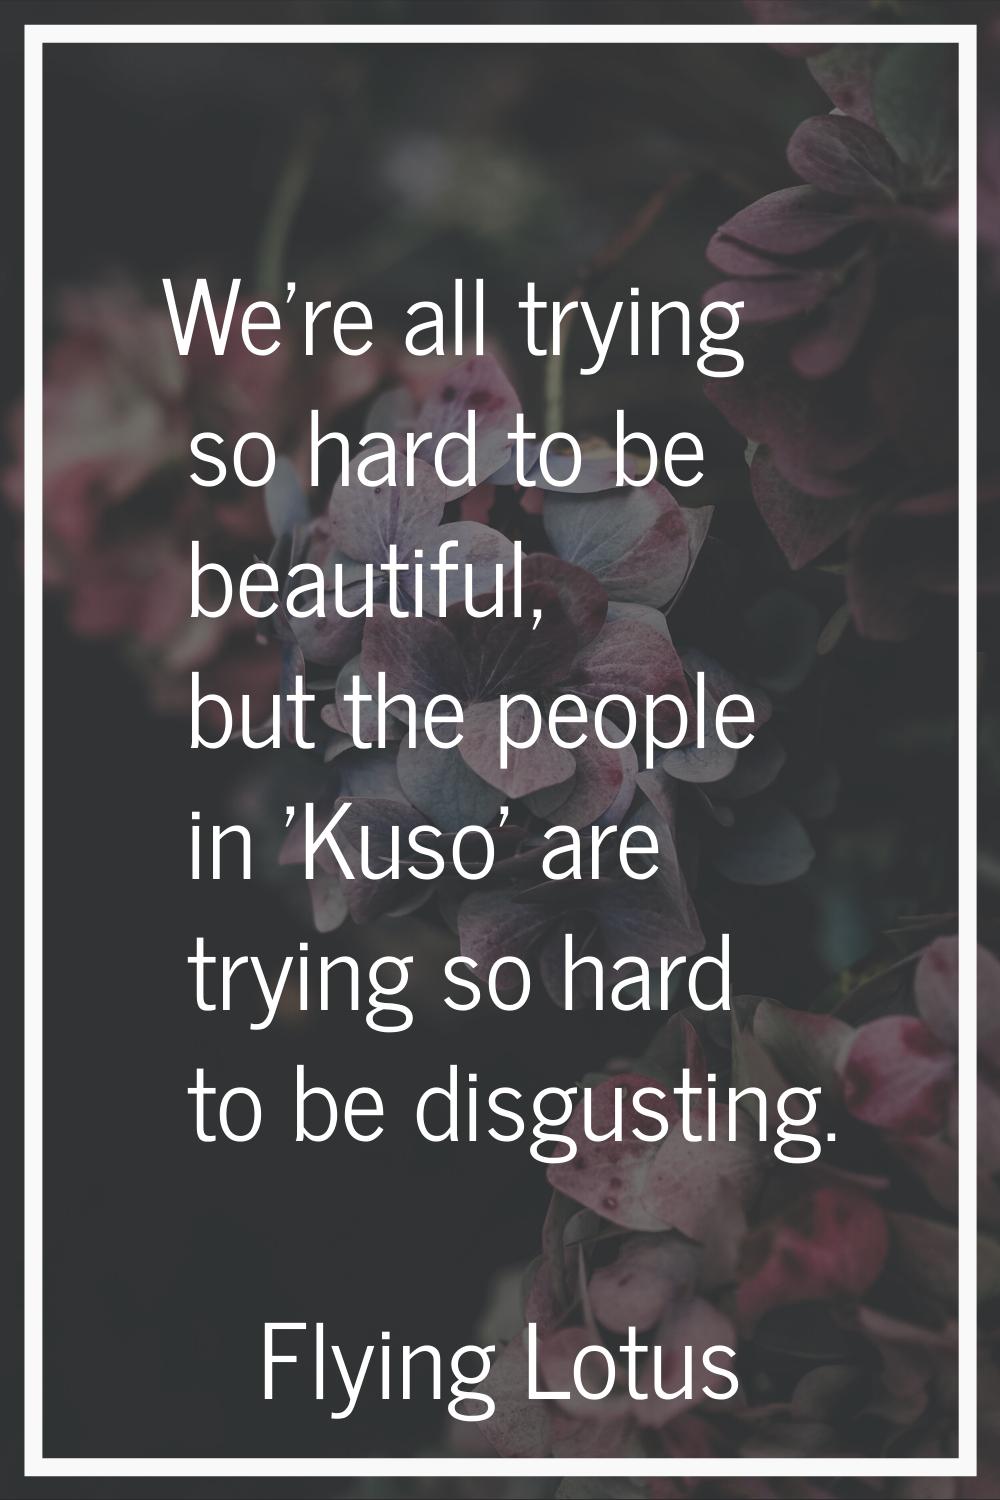 We're all trying so hard to be beautiful, but the people in 'Kuso' are trying so hard to be disgust